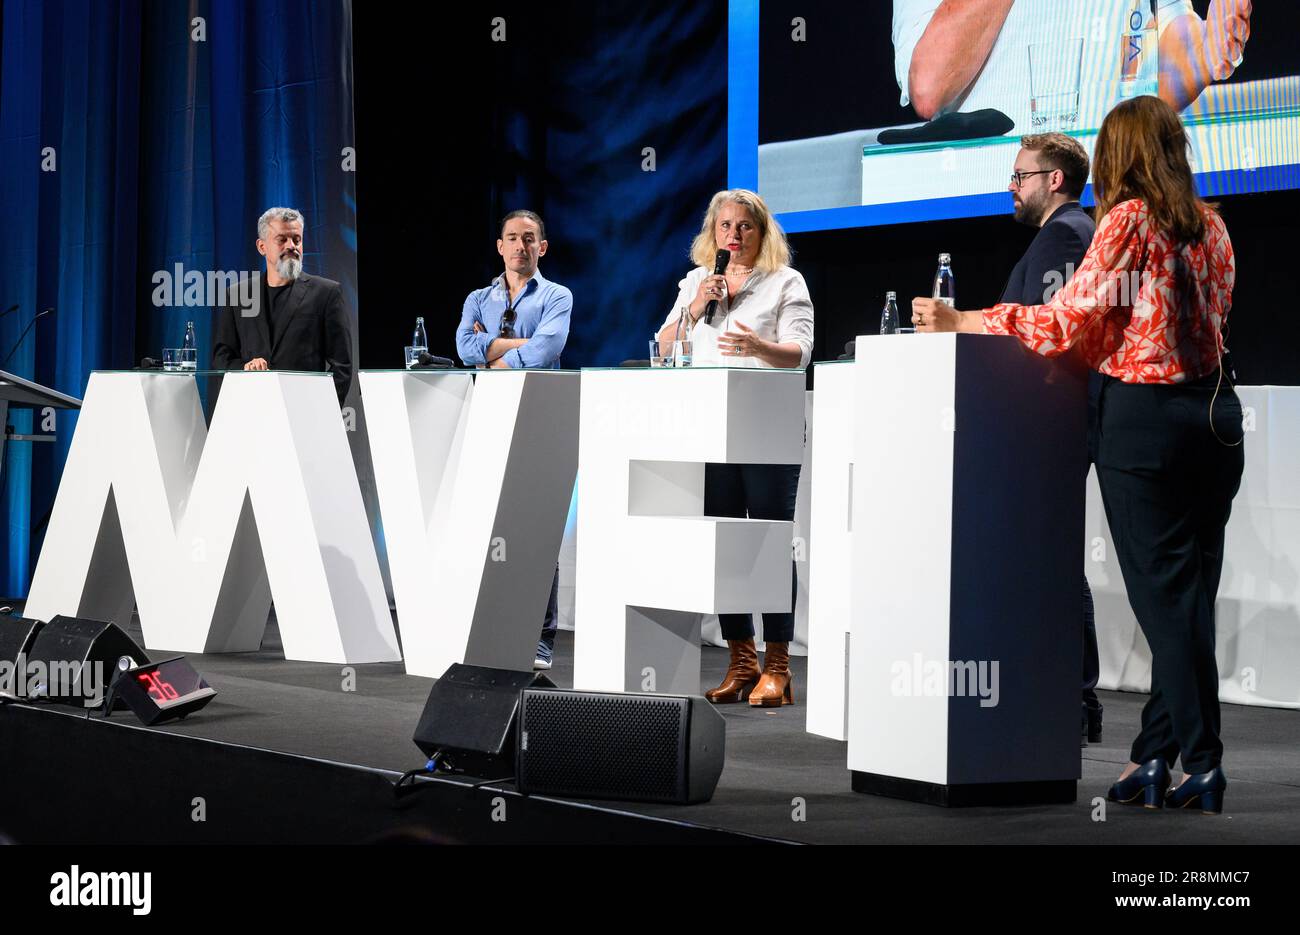 22 June 2023, Berlin: Jan Jessen (l-r), foreign reporter at Funke Mediengruppe, Bojan Pancevski, Germany correspondent at the Wall Street Journal, Susanne Koelbl, foreign correspondent at Der Spiegel, and Paul Ronzheimer, deputy editor-in-chief of Bild, discuss freedom of the press in the context of war, crisis, climate at the 2023 Congress of the Media Association of the Free Press (MVFP) with moderator Franziska Reich, editor-in-chief of Focus. The Media Association of the Free Press is the federal association of magazine publishers. It represents around 350 member publishers and more than 7 Stock Photo